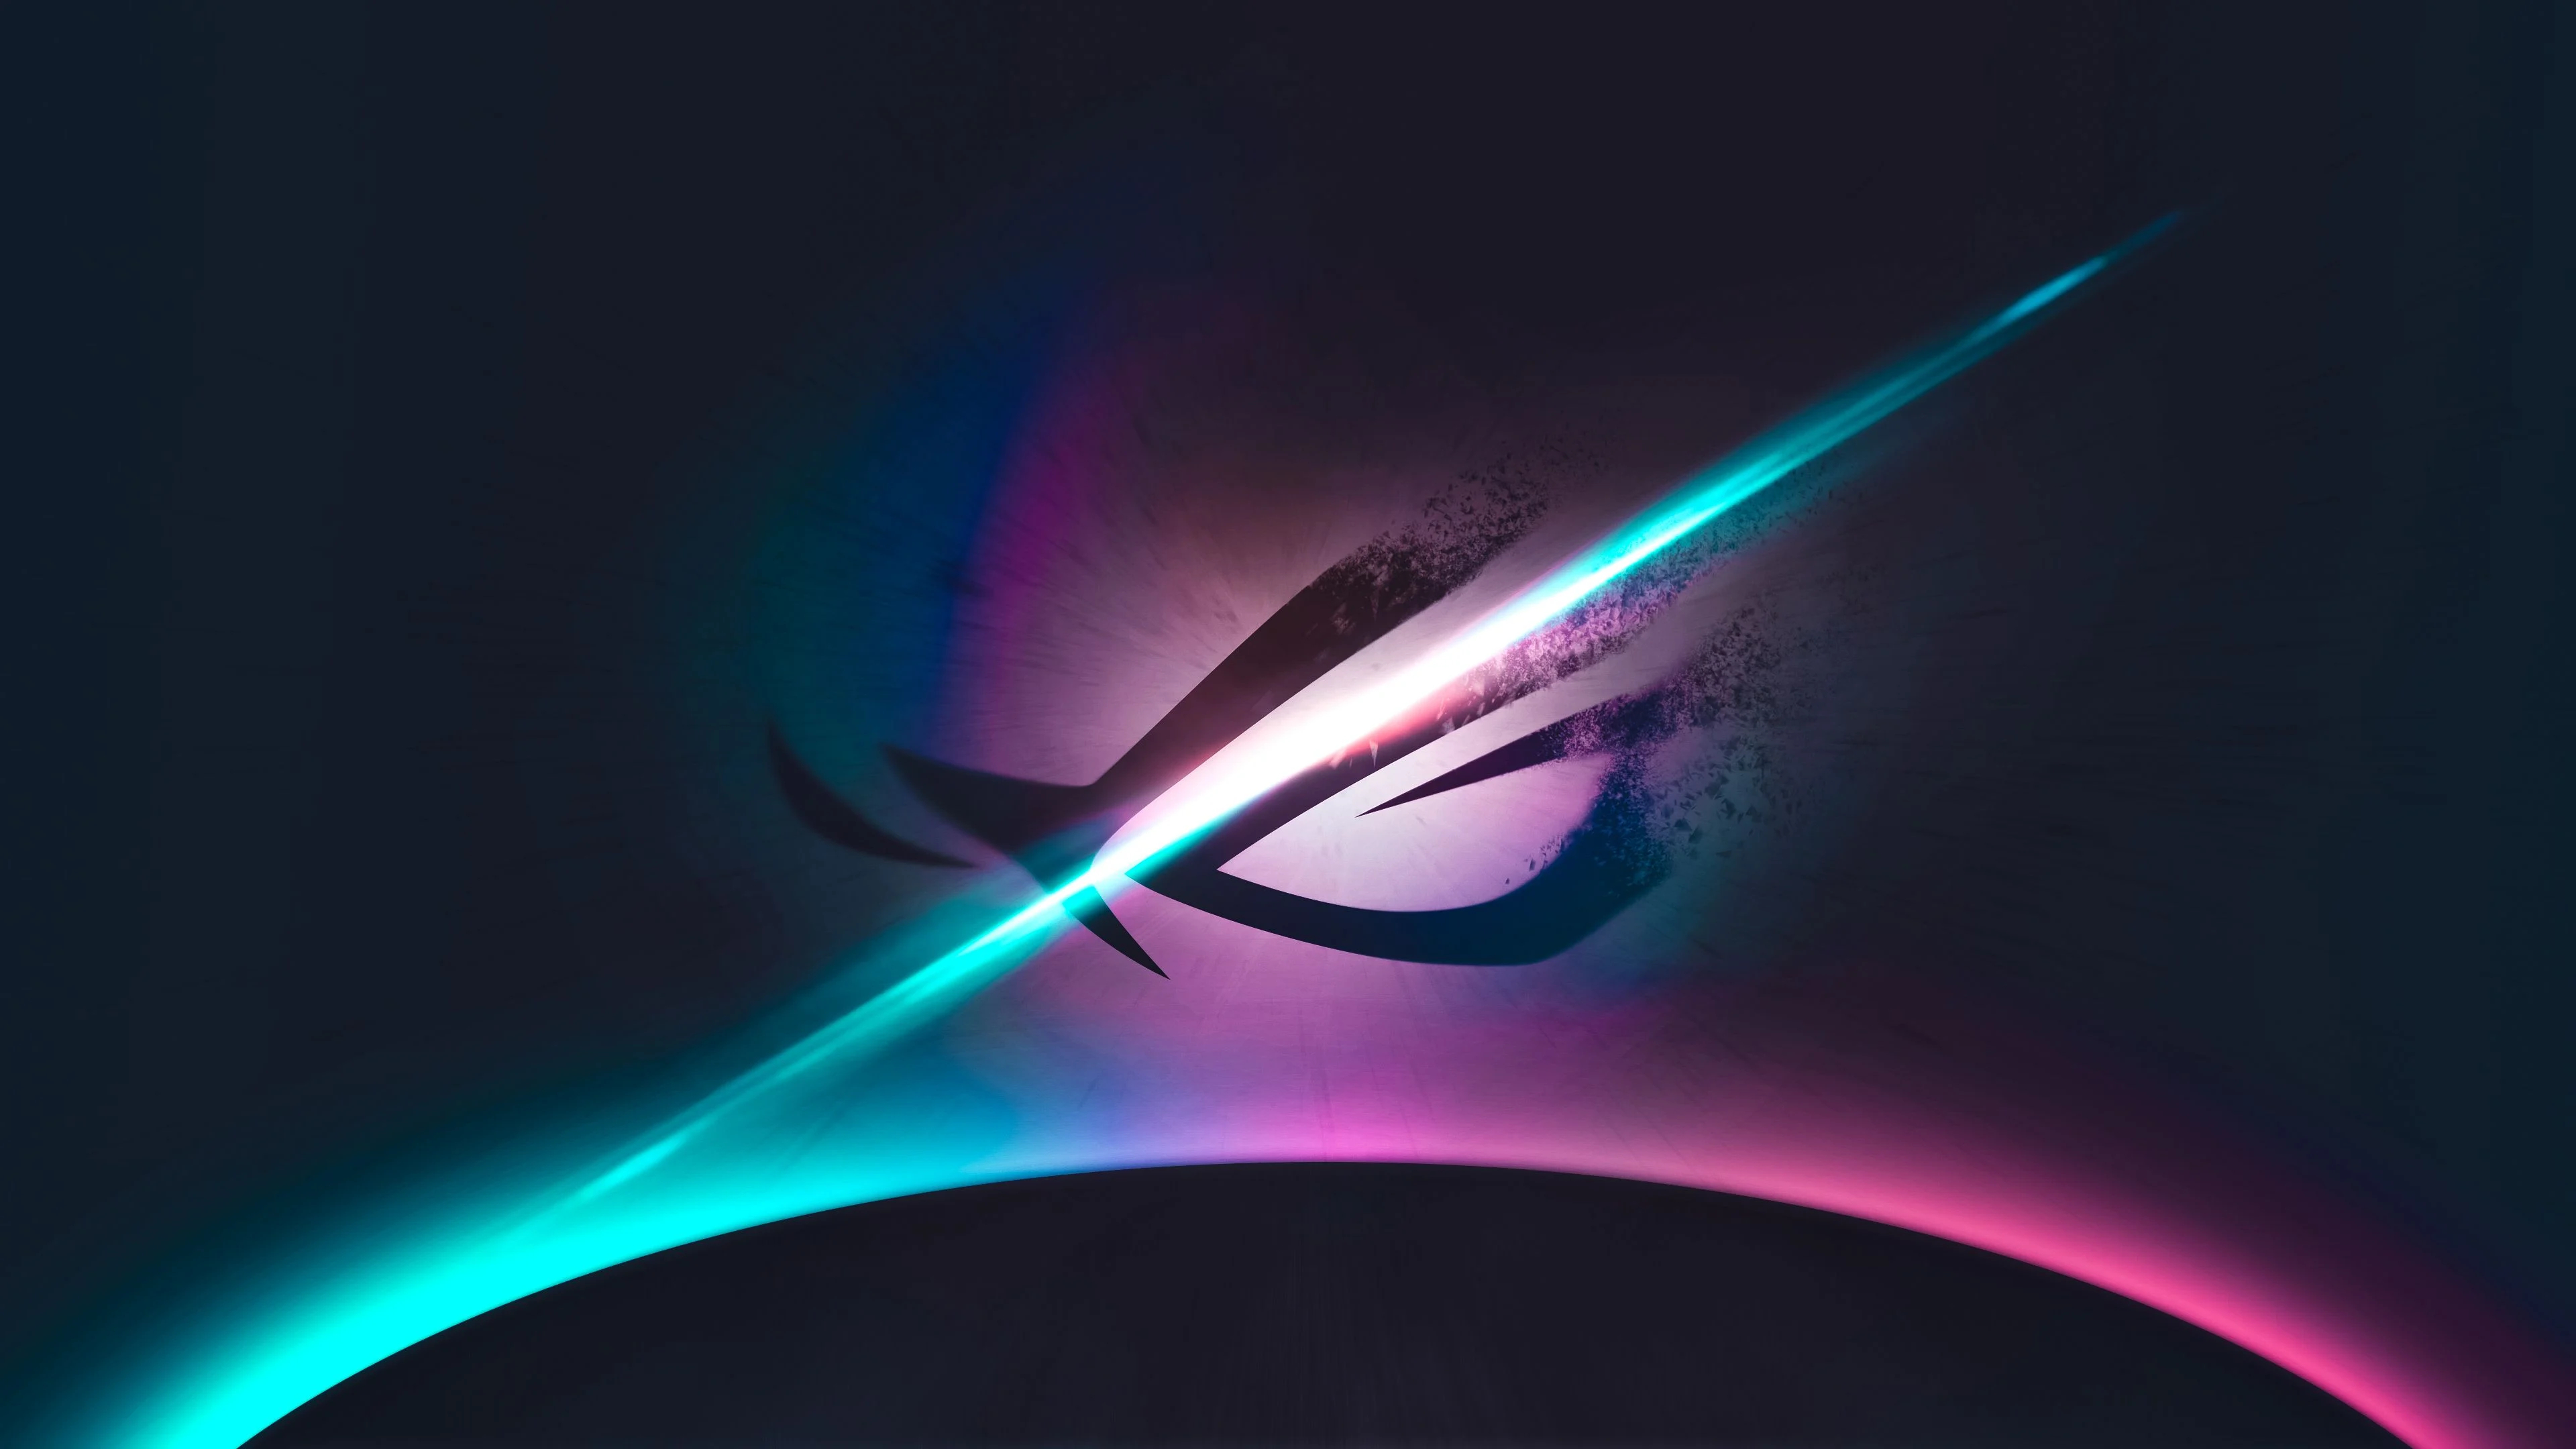 3840x2160 Asus ROG 4K Ultra HD Wallpapers Top Free Asus ROG 4K Ultra HD Backgrounds